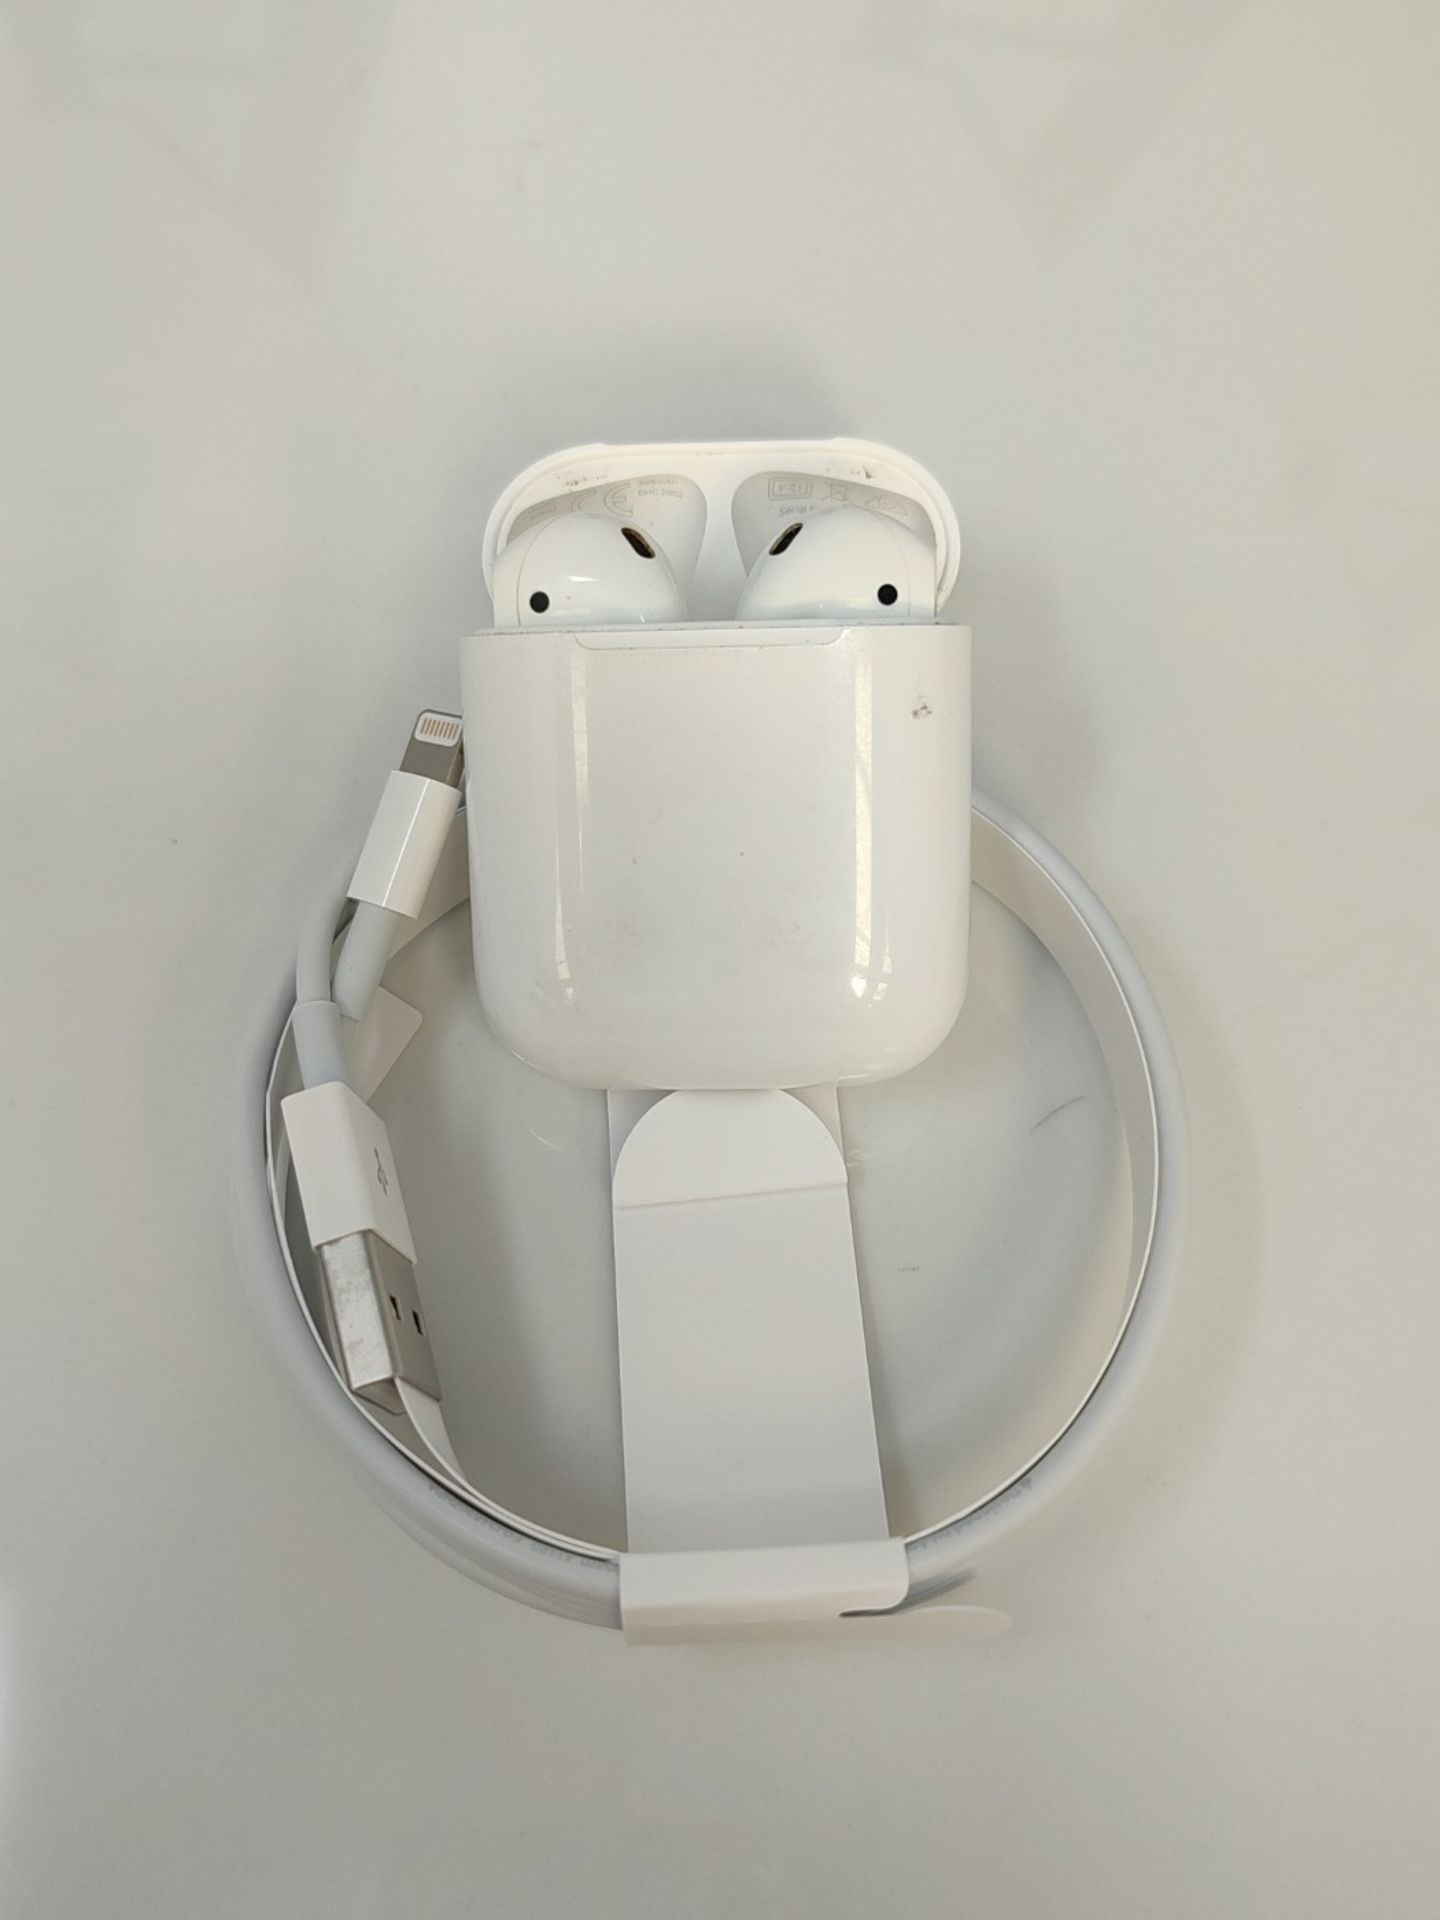 RRP £119.00 Apple AirPods with charging case via cable (second generation) - Image 3 of 3